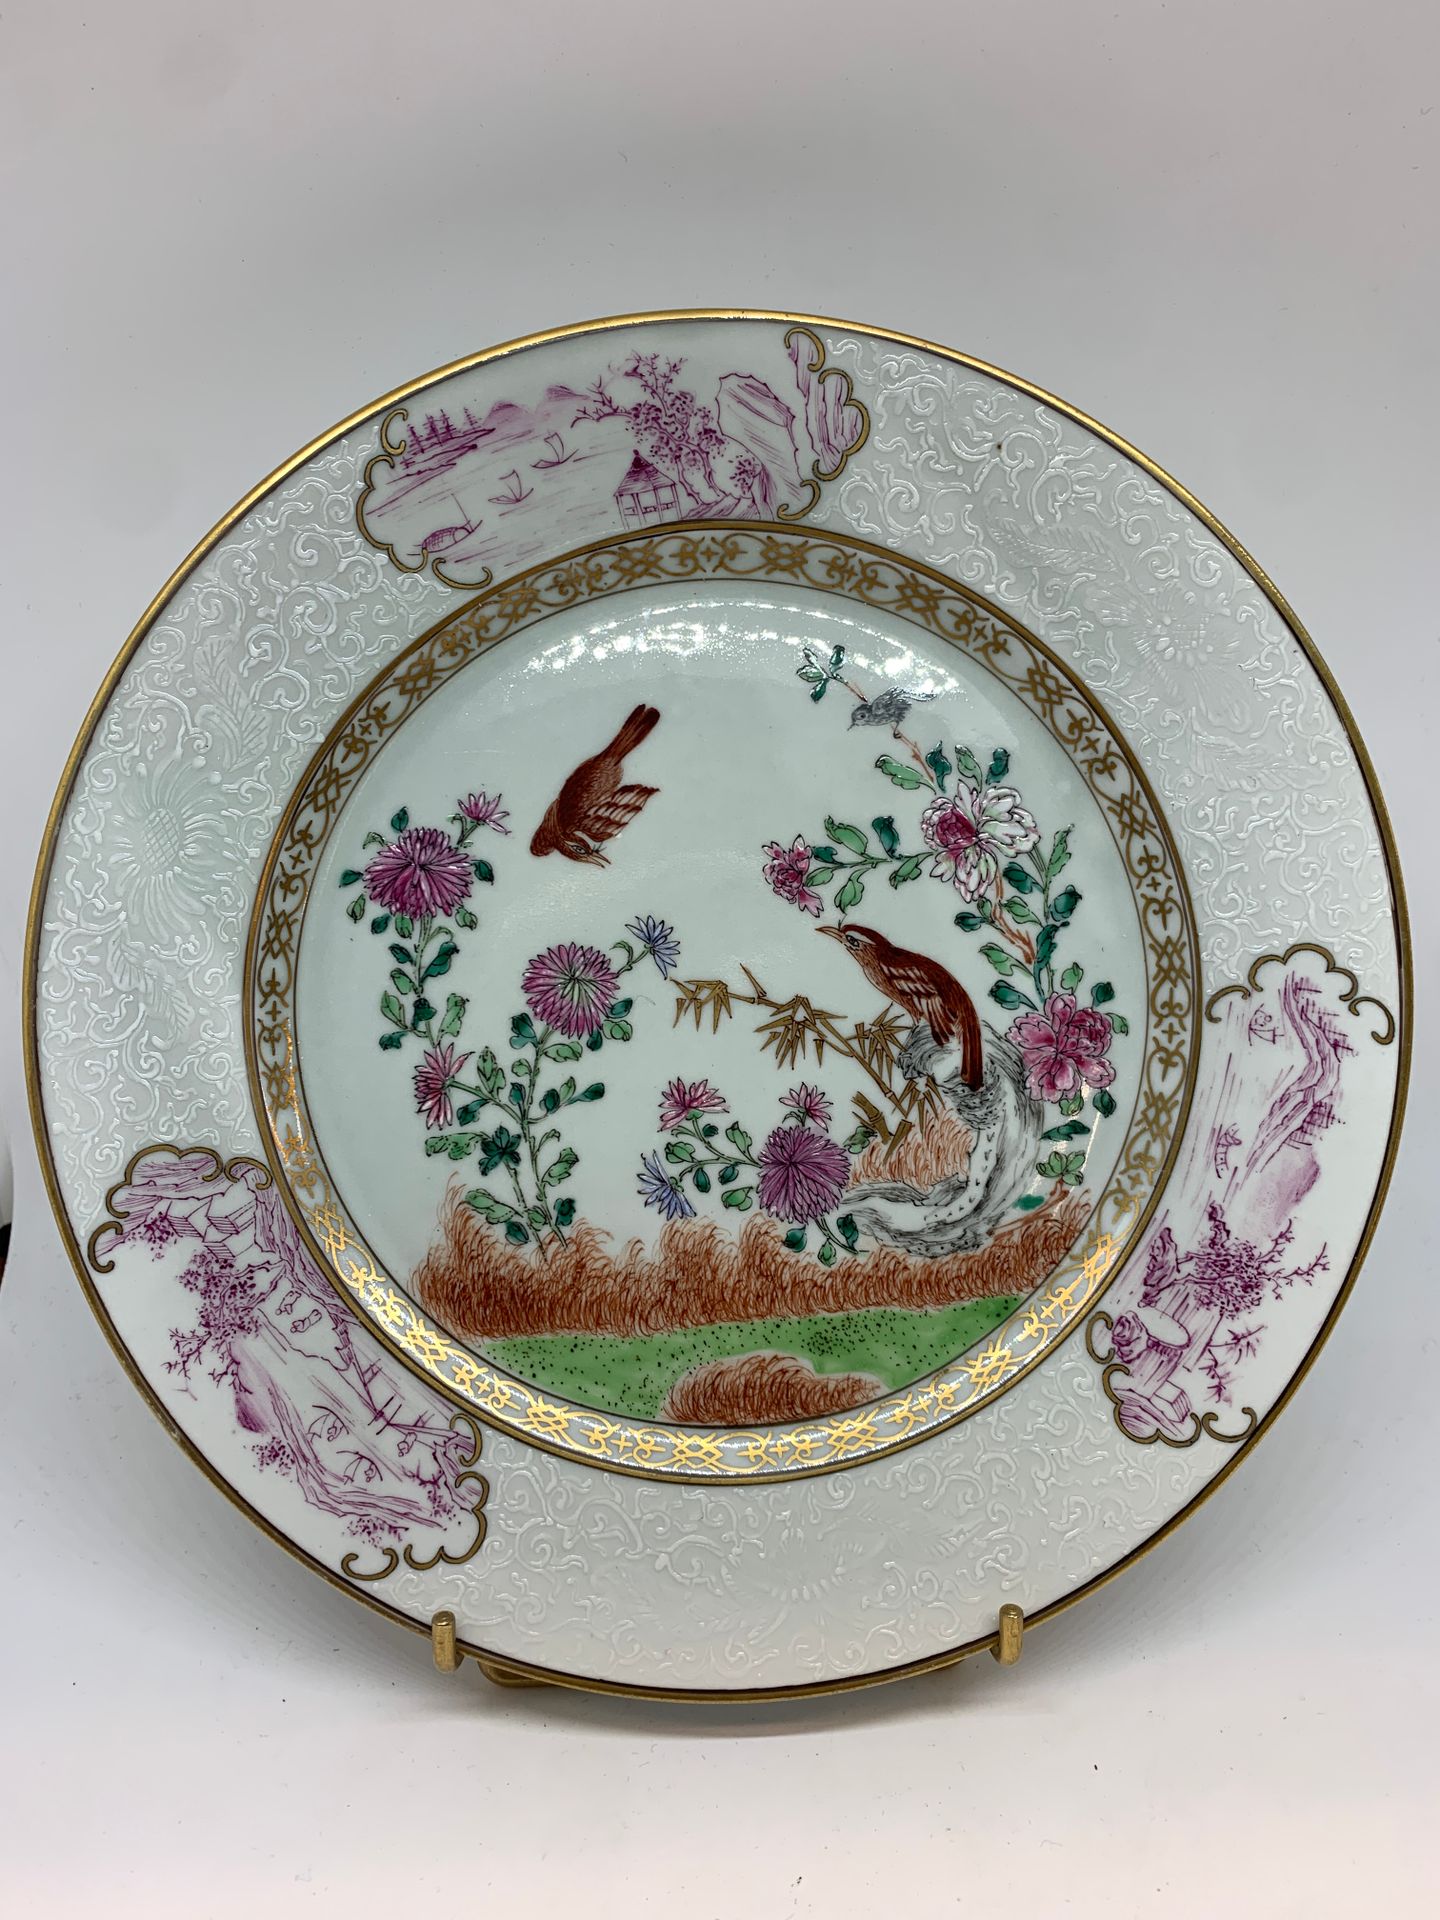 Null CHINA
Porcelain plate with polychrome decoration of flowers and birds in li&hellip;